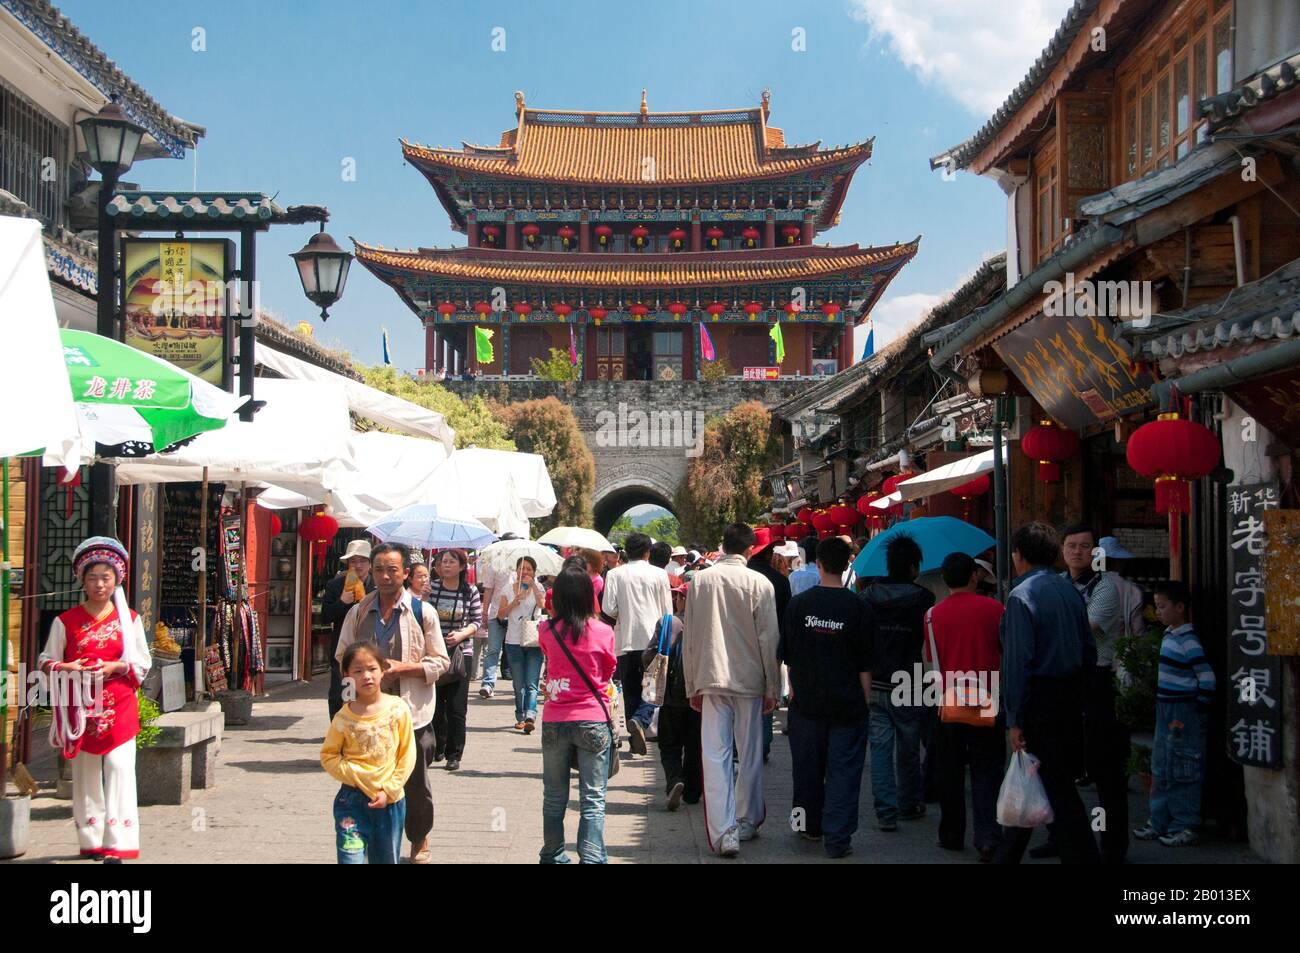 China: Tonghaimen (South Gate), Old City, Dali, Yunnan.  Dali is the ancient capital of both the Bai kingdom Nanzhao, which flourished in the area during the 8th and 9th centuries, and the Kingdom of Dali, which reigned from 937-1253. Situated in a once significantly Muslim part of South China, Dali was also the center of the Panthay Rebellion against the reigning imperial Qing Dynasty from 1856-1863.  The old city was built during Ming Dynasty emperor Hongwu's reign (1368–1398). Stock Photo